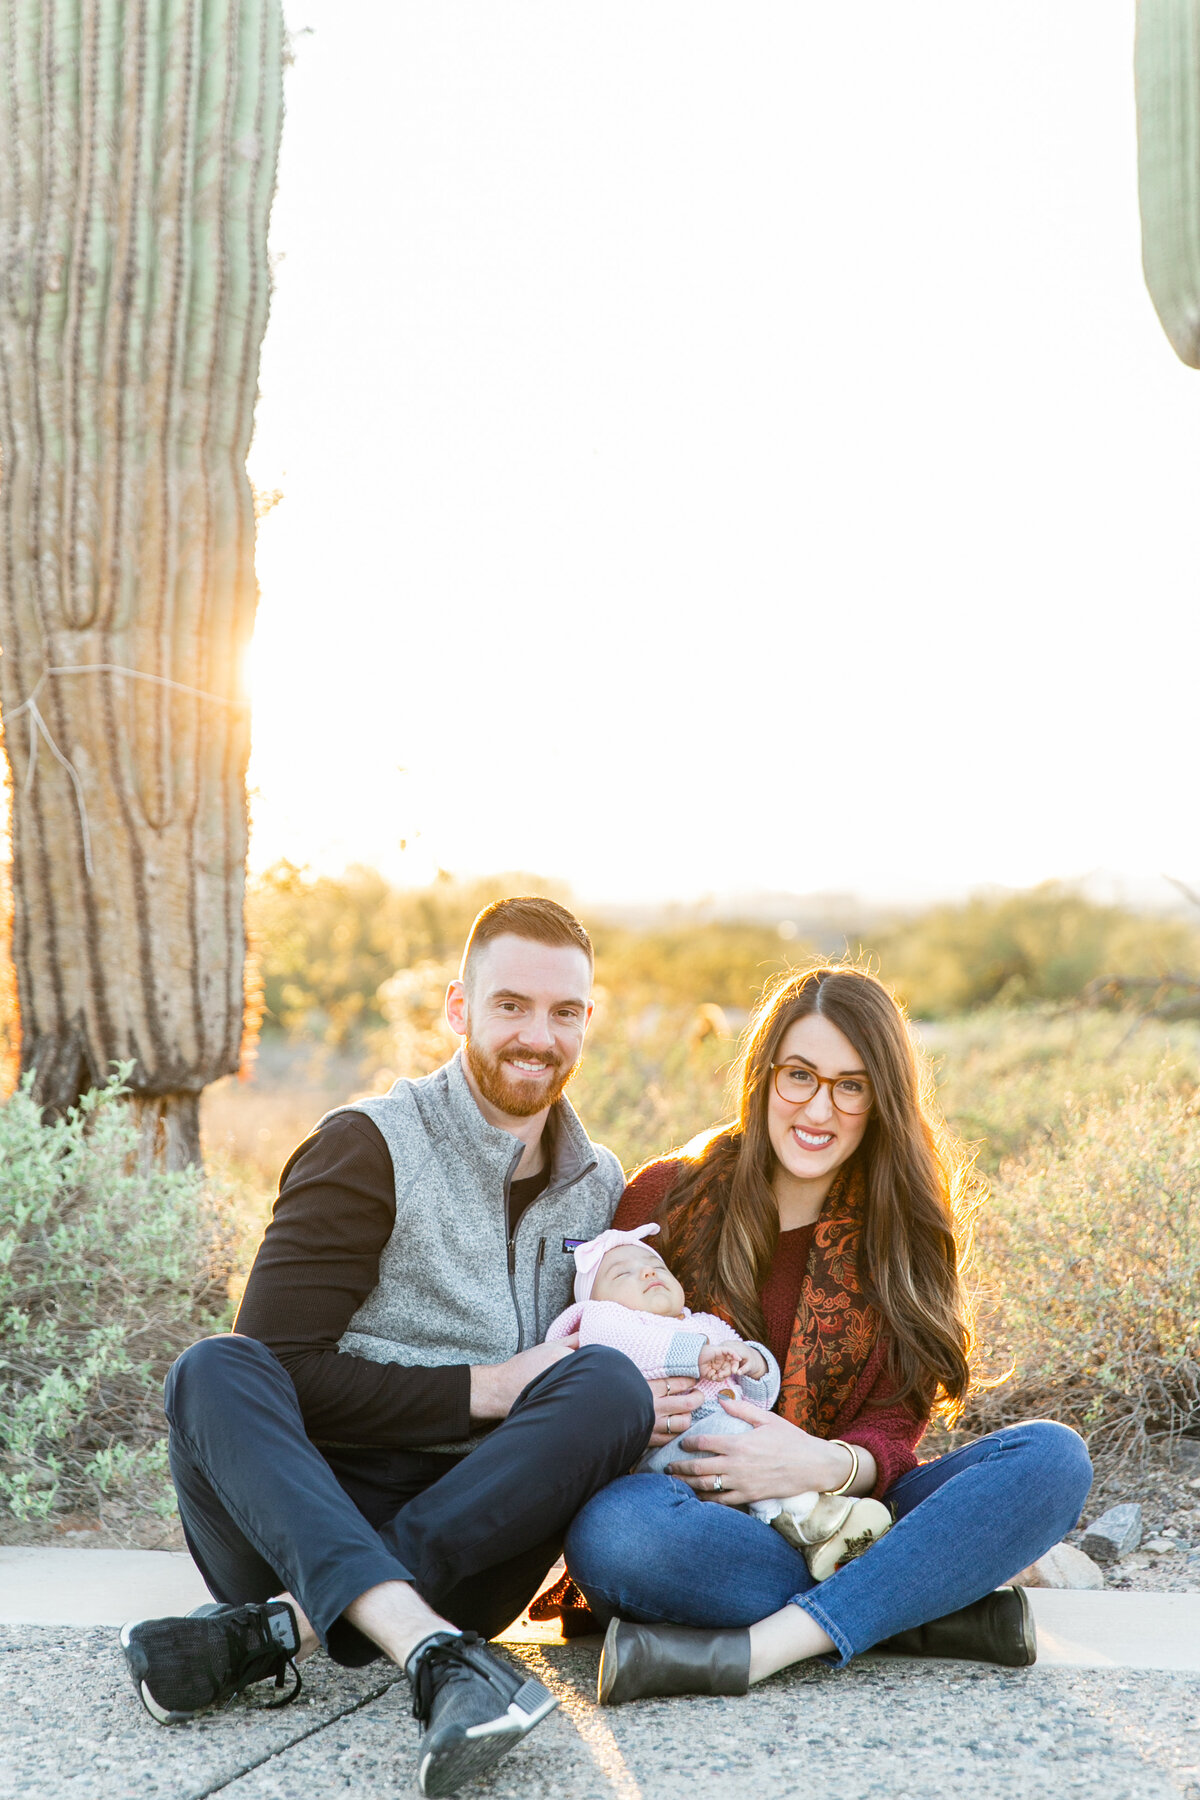 Karlie Colleen Photography - Scottsdale Family Photography - Lauren & Family-147